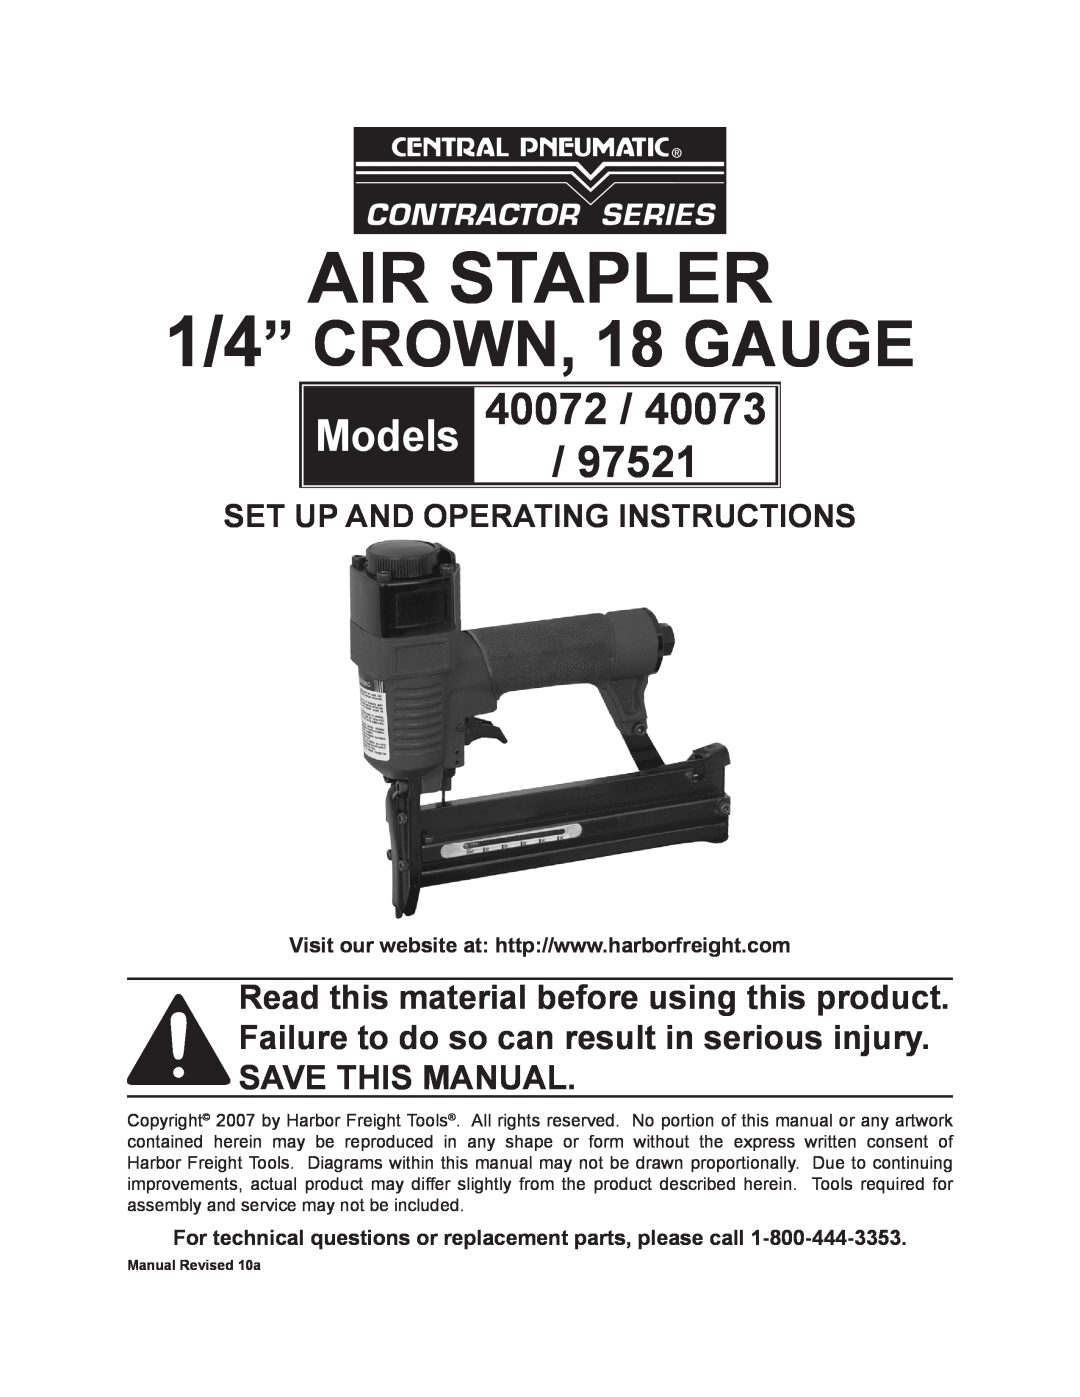 Harbor Freight Tools 40072 operating instructions For technical questions or replacement parts, please call, Air Stapler 